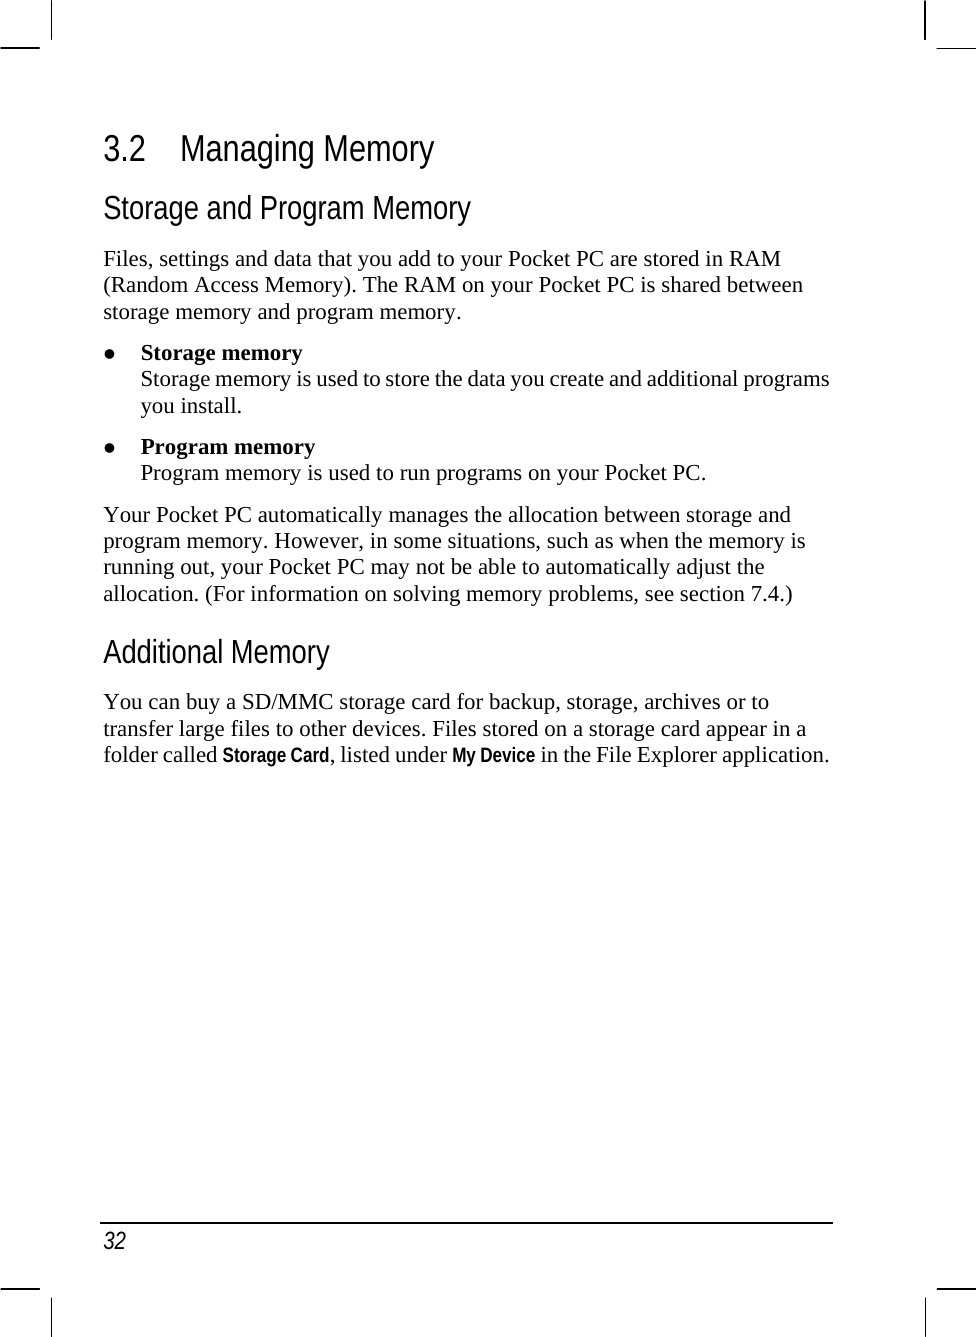  32 3.2 Managing Memory Storage and Program Memory Files, settings and data that you add to your Pocket PC are stored in RAM (Random Access Memory). The RAM on your Pocket PC is shared between storage memory and program memory. z Storage memory Storage memory is used to store the data you create and additional programs you install. z Program memory Program memory is used to run programs on your Pocket PC. Your Pocket PC automatically manages the allocation between storage and program memory. However, in some situations, such as when the memory is running out, your Pocket PC may not be able to automatically adjust the allocation. (For information on solving memory problems, see section 7.4.) Additional Memory You can buy a SD/MMC storage card for backup, storage, archives or to transfer large files to other devices. Files stored on a storage card appear in a folder called Storage Card, listed under My Device in the File Explorer application.        